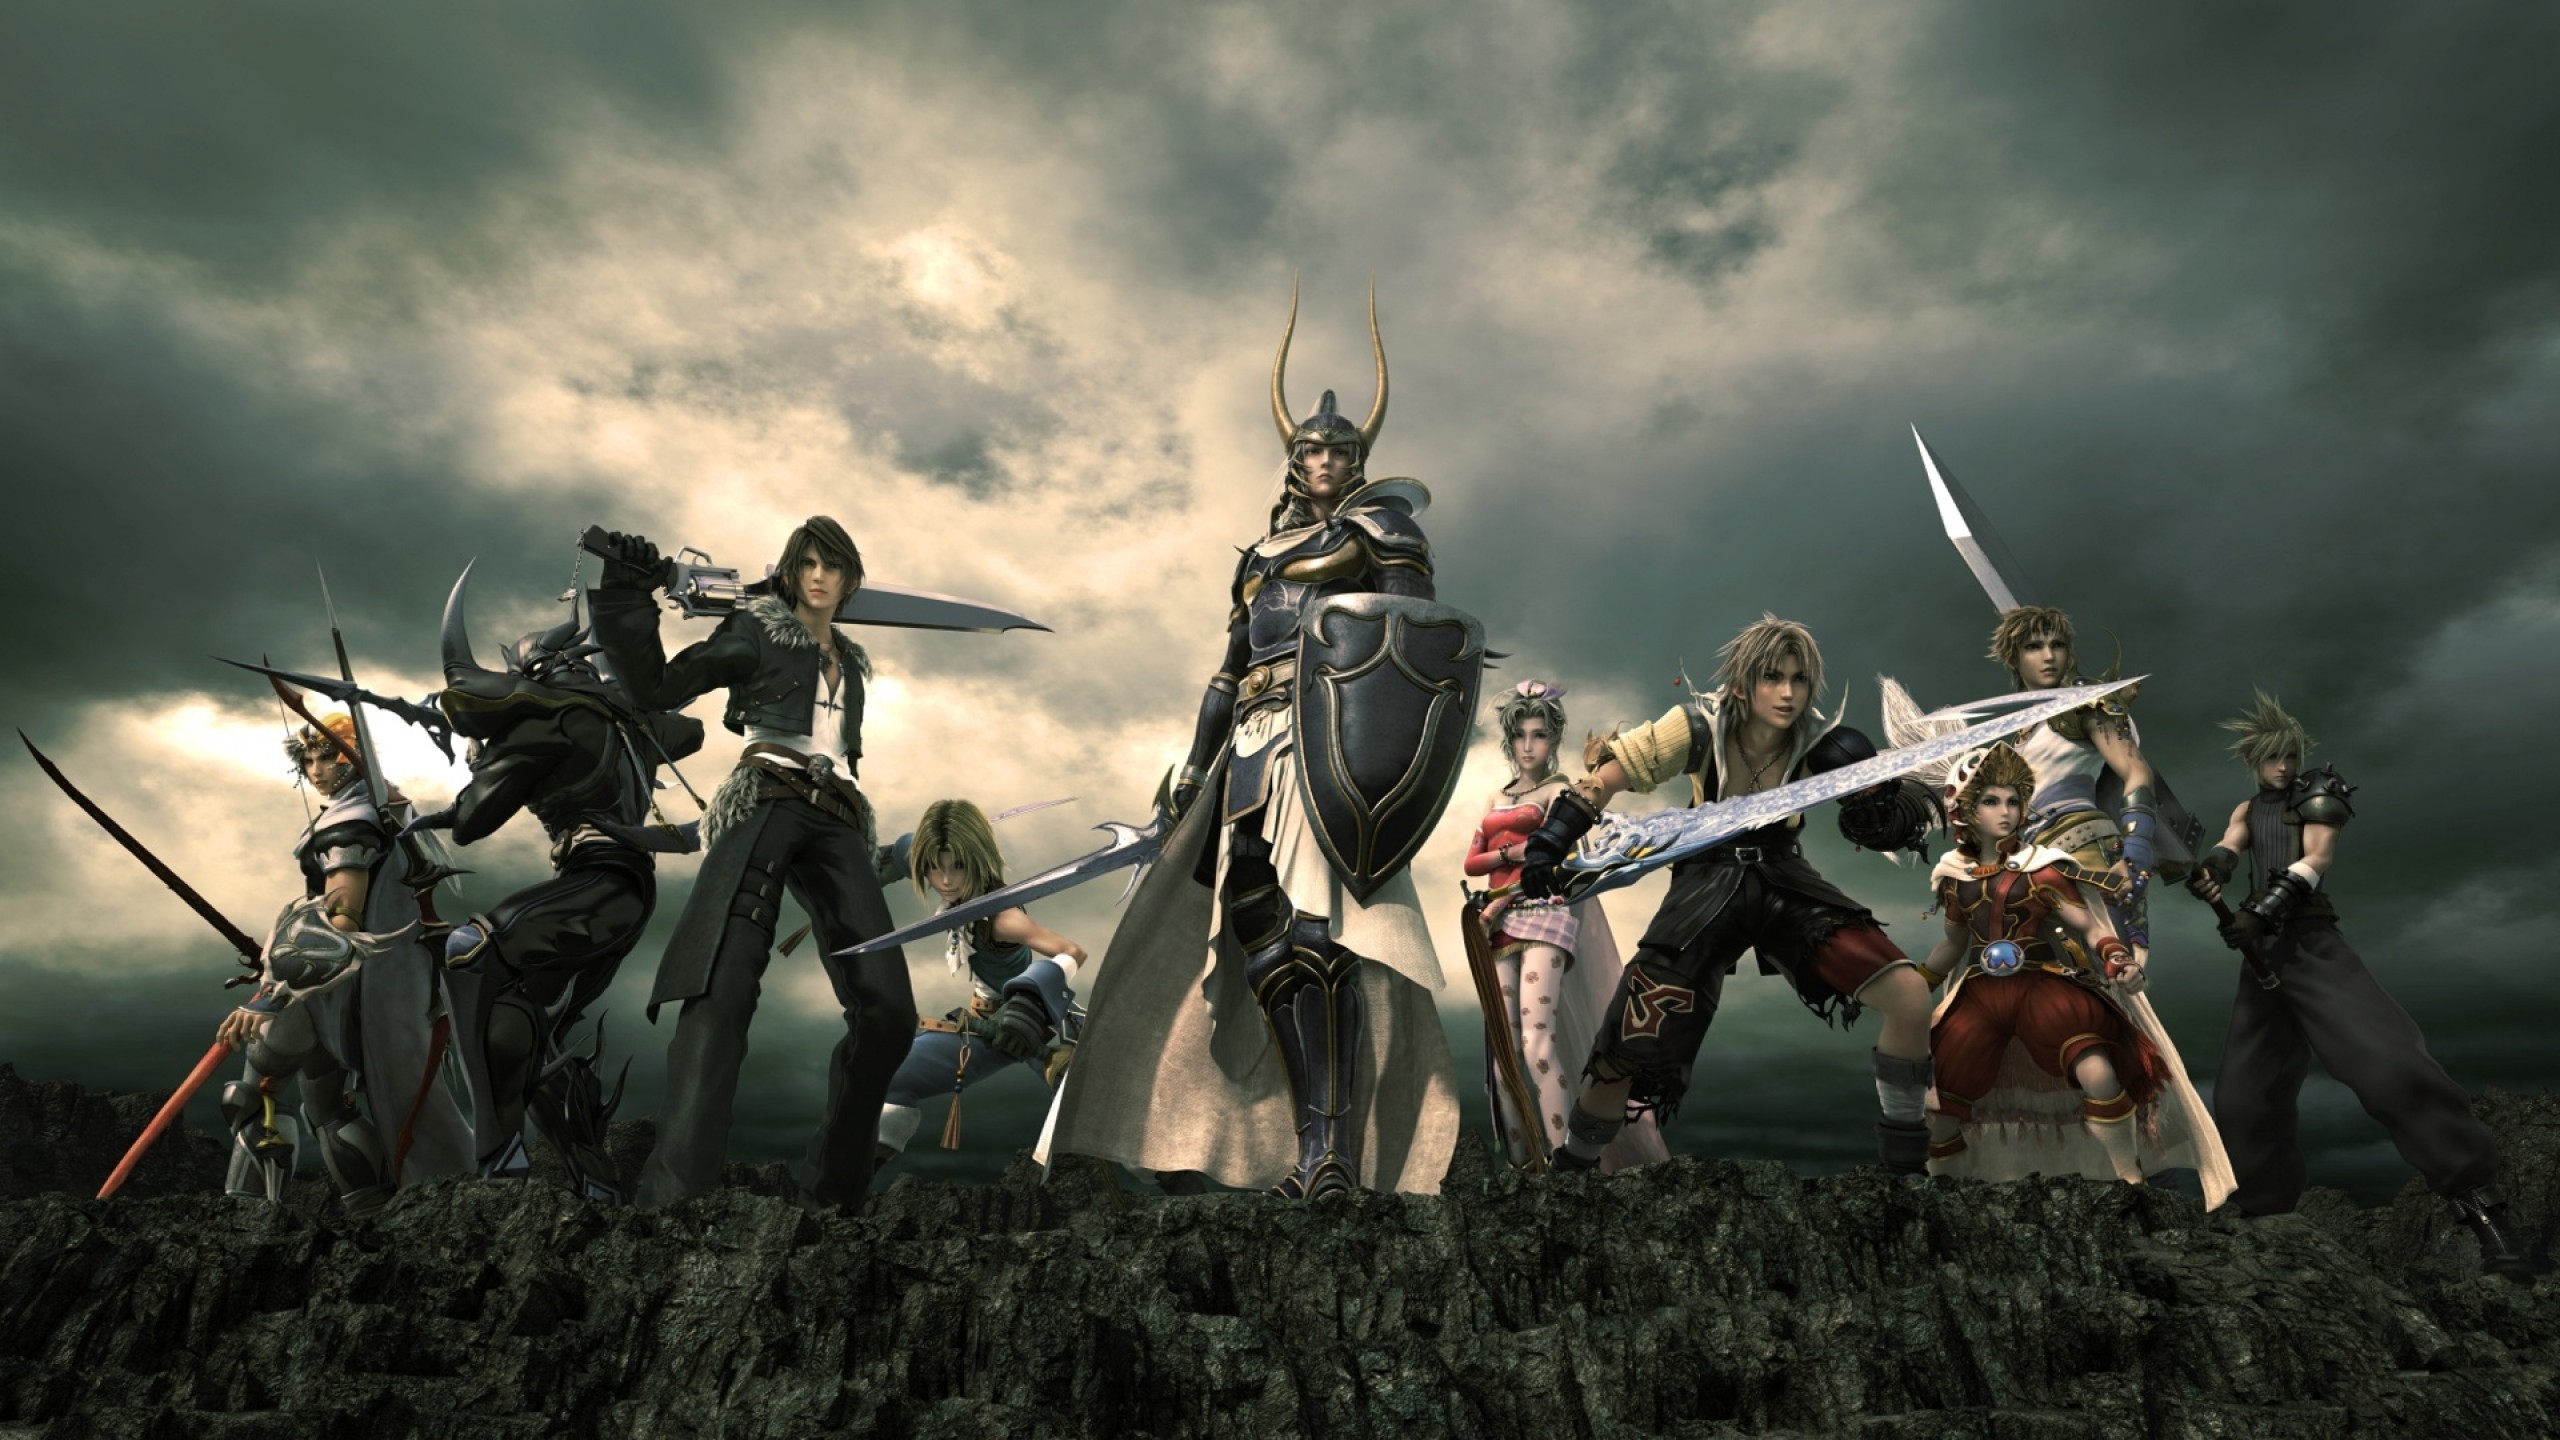 Final Fantasy Xiv Characters Wallpaper For Desktop And Mobiles Youtube Cover Photo Hd Wallpaper Wallpapers Net